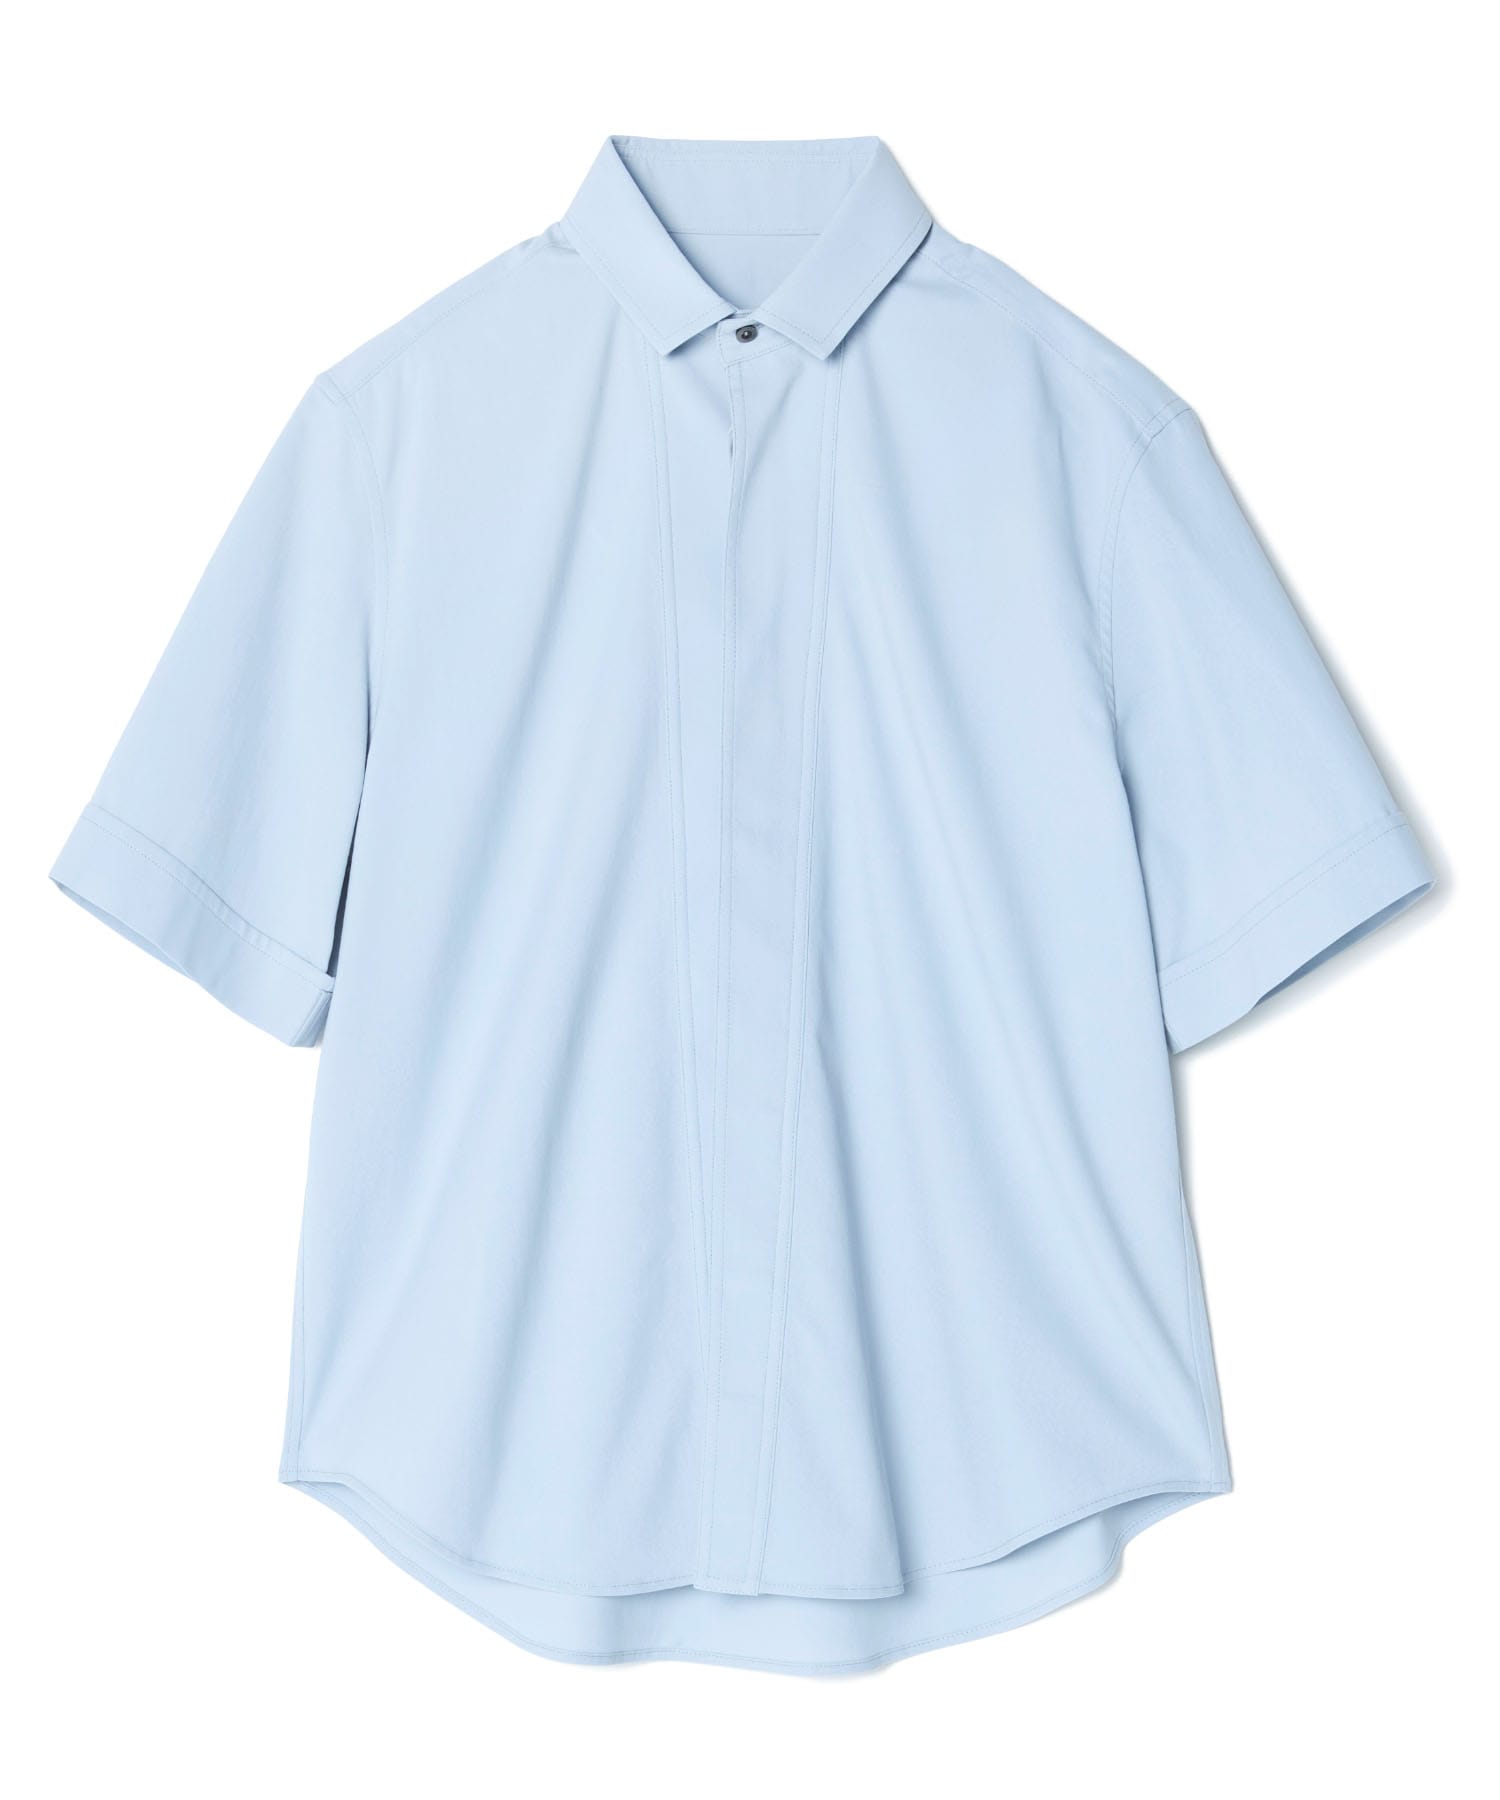 FLY FRONT SHORT-SLEEVED SHIRT